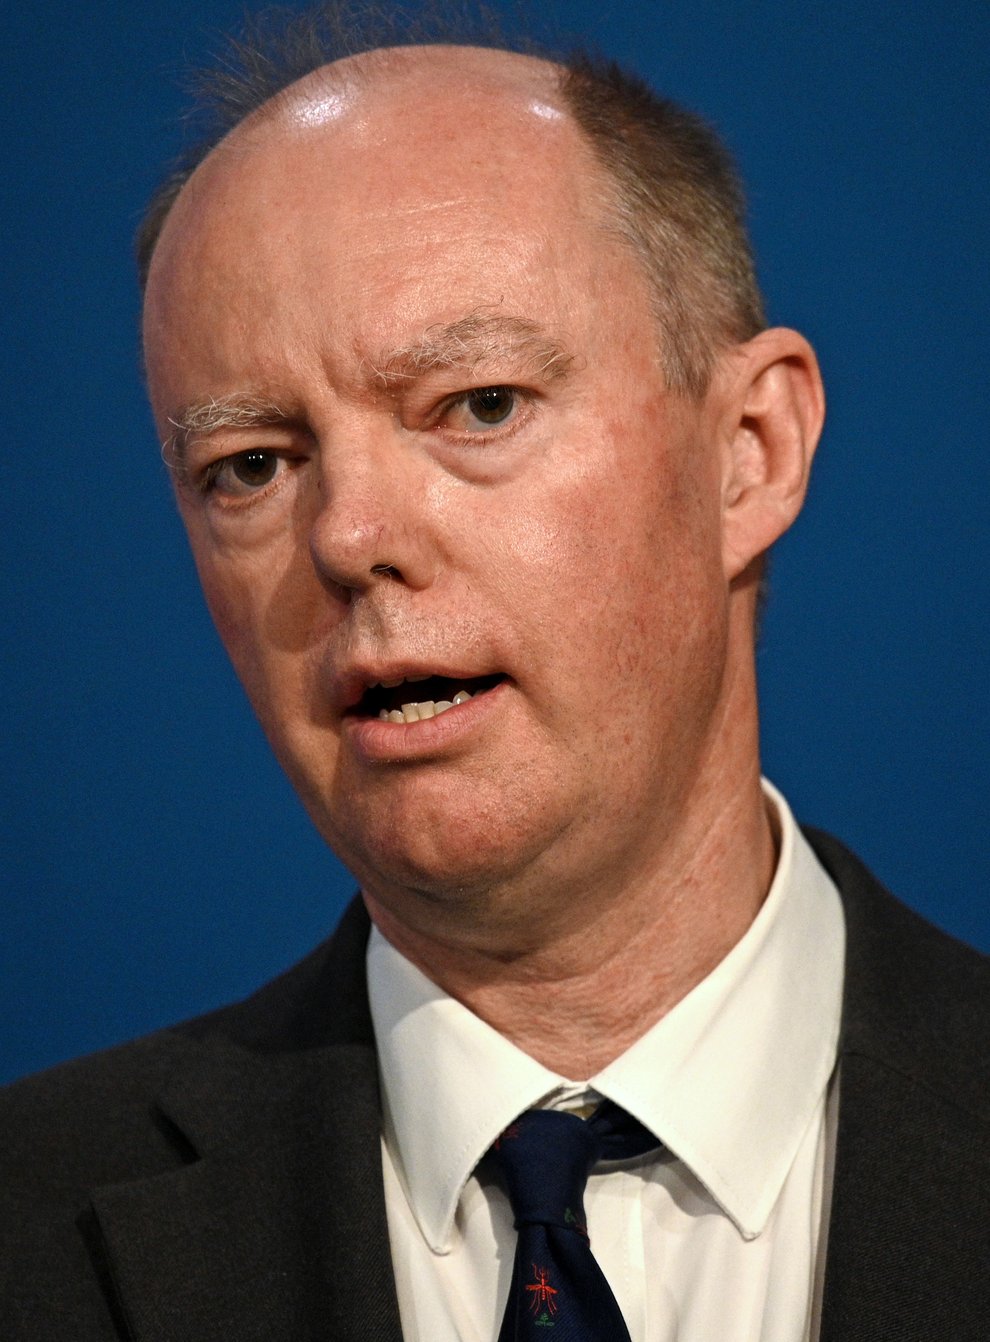 England's chief medical officer Chris Whitty